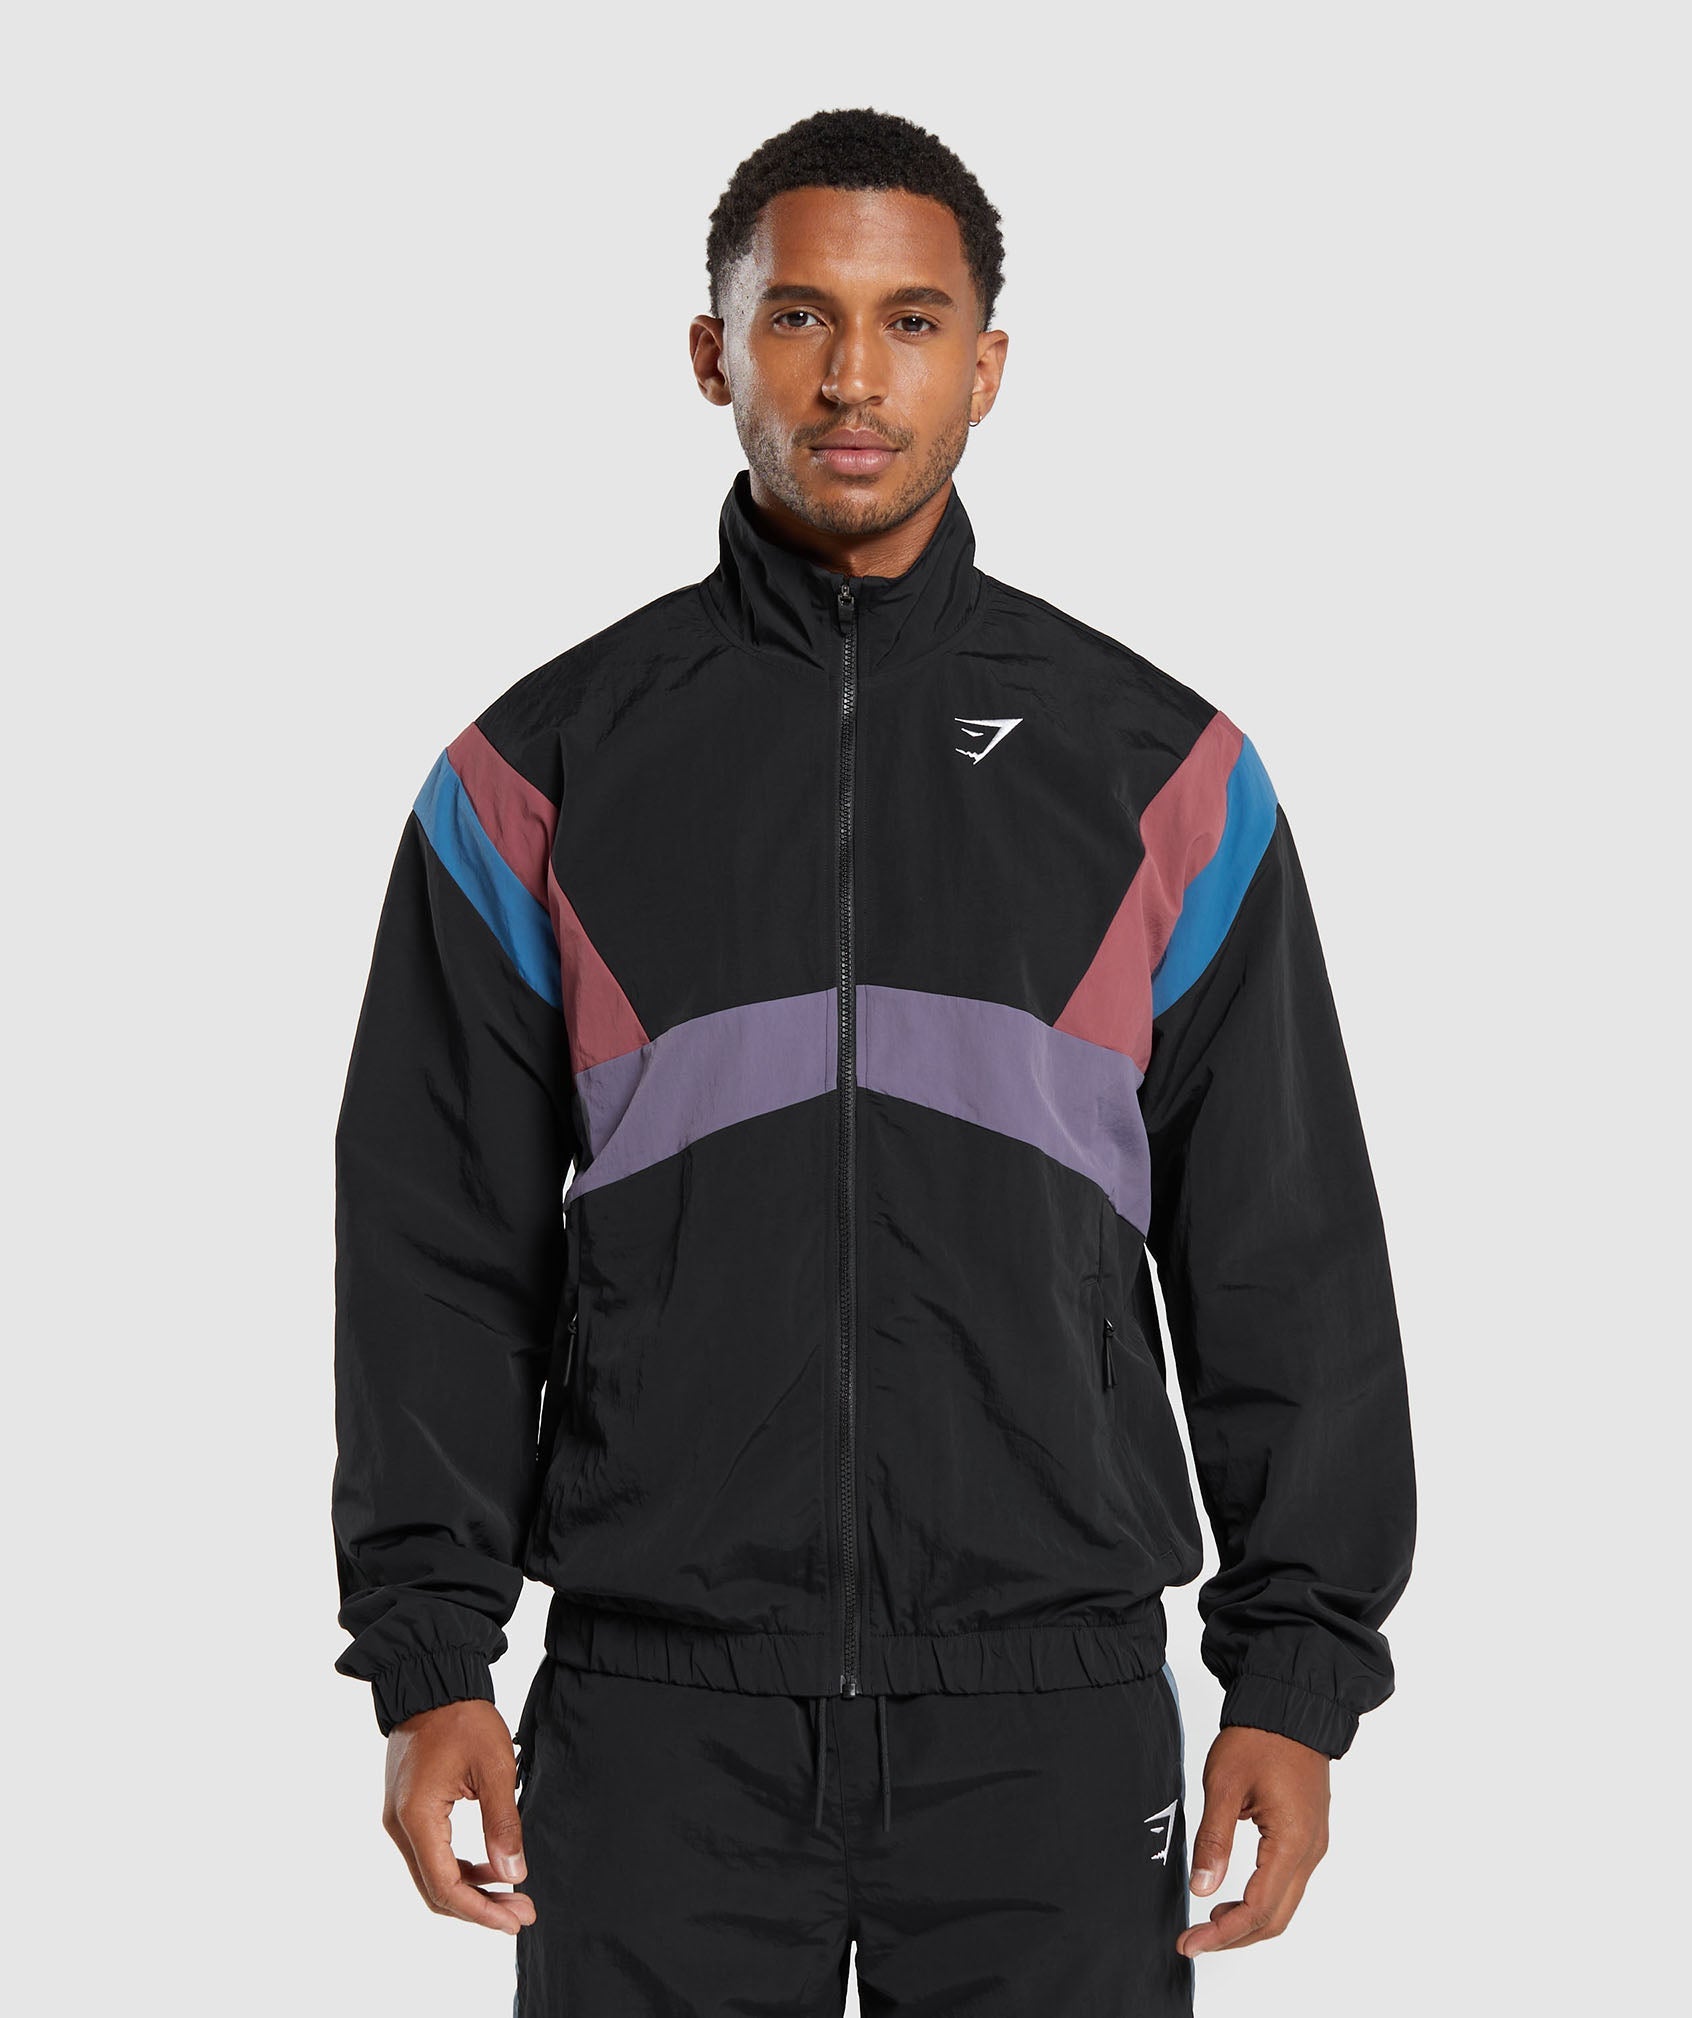 Retro Track Jacket in Black/Blue/Purple/Soft Berry is out of stock